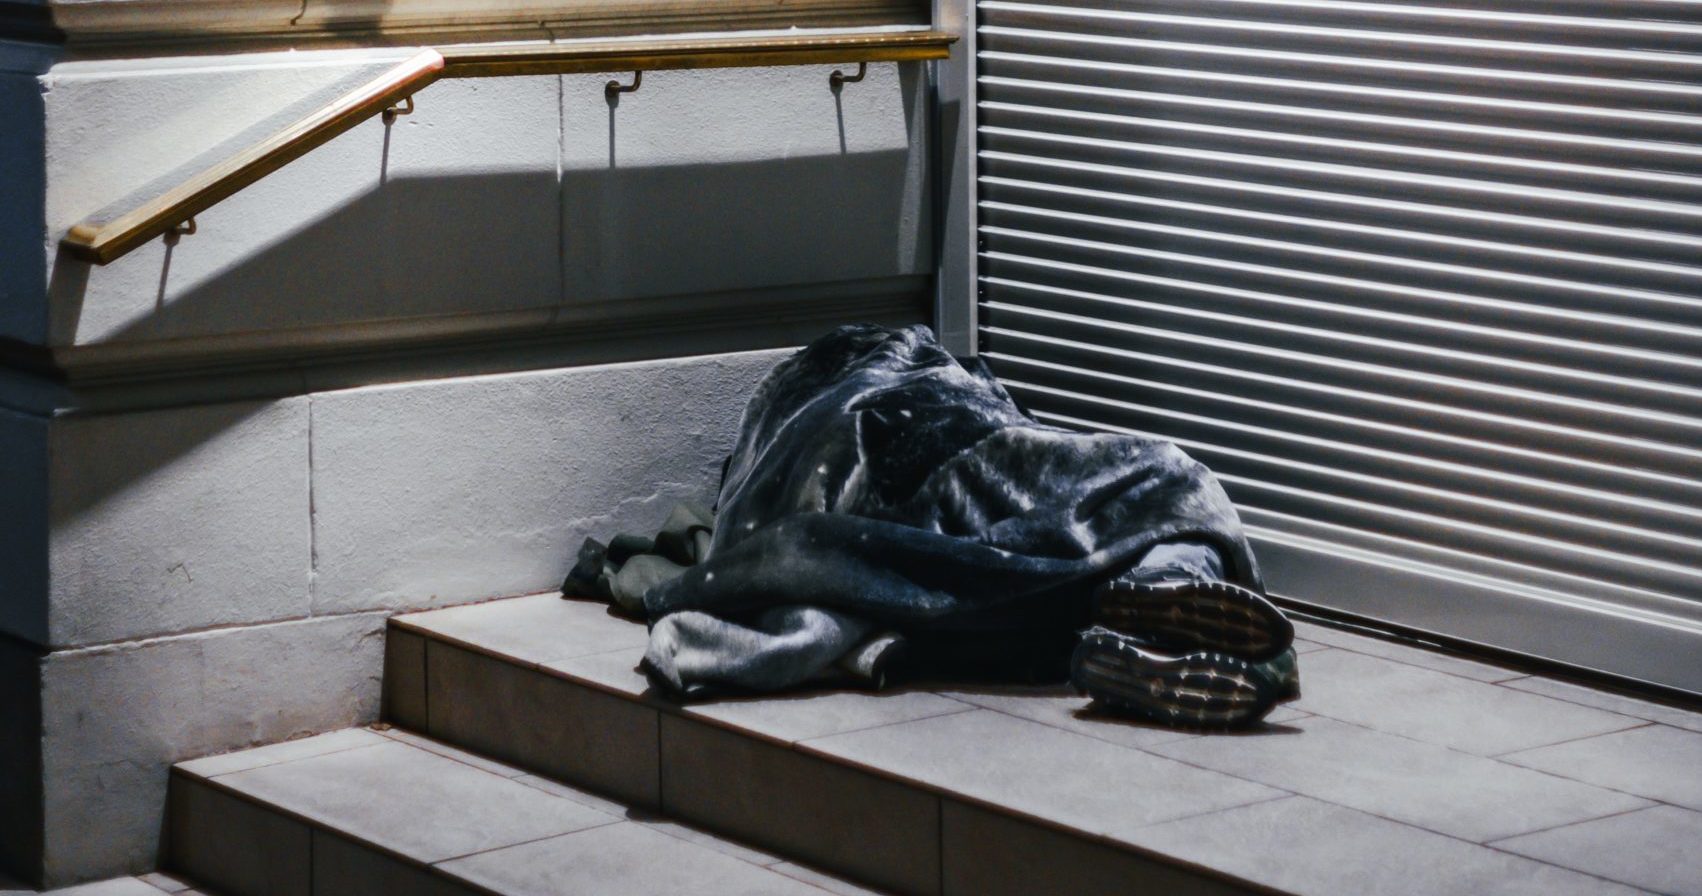 Ground-breaking New Report Offers Solutions to Ending Homelessness